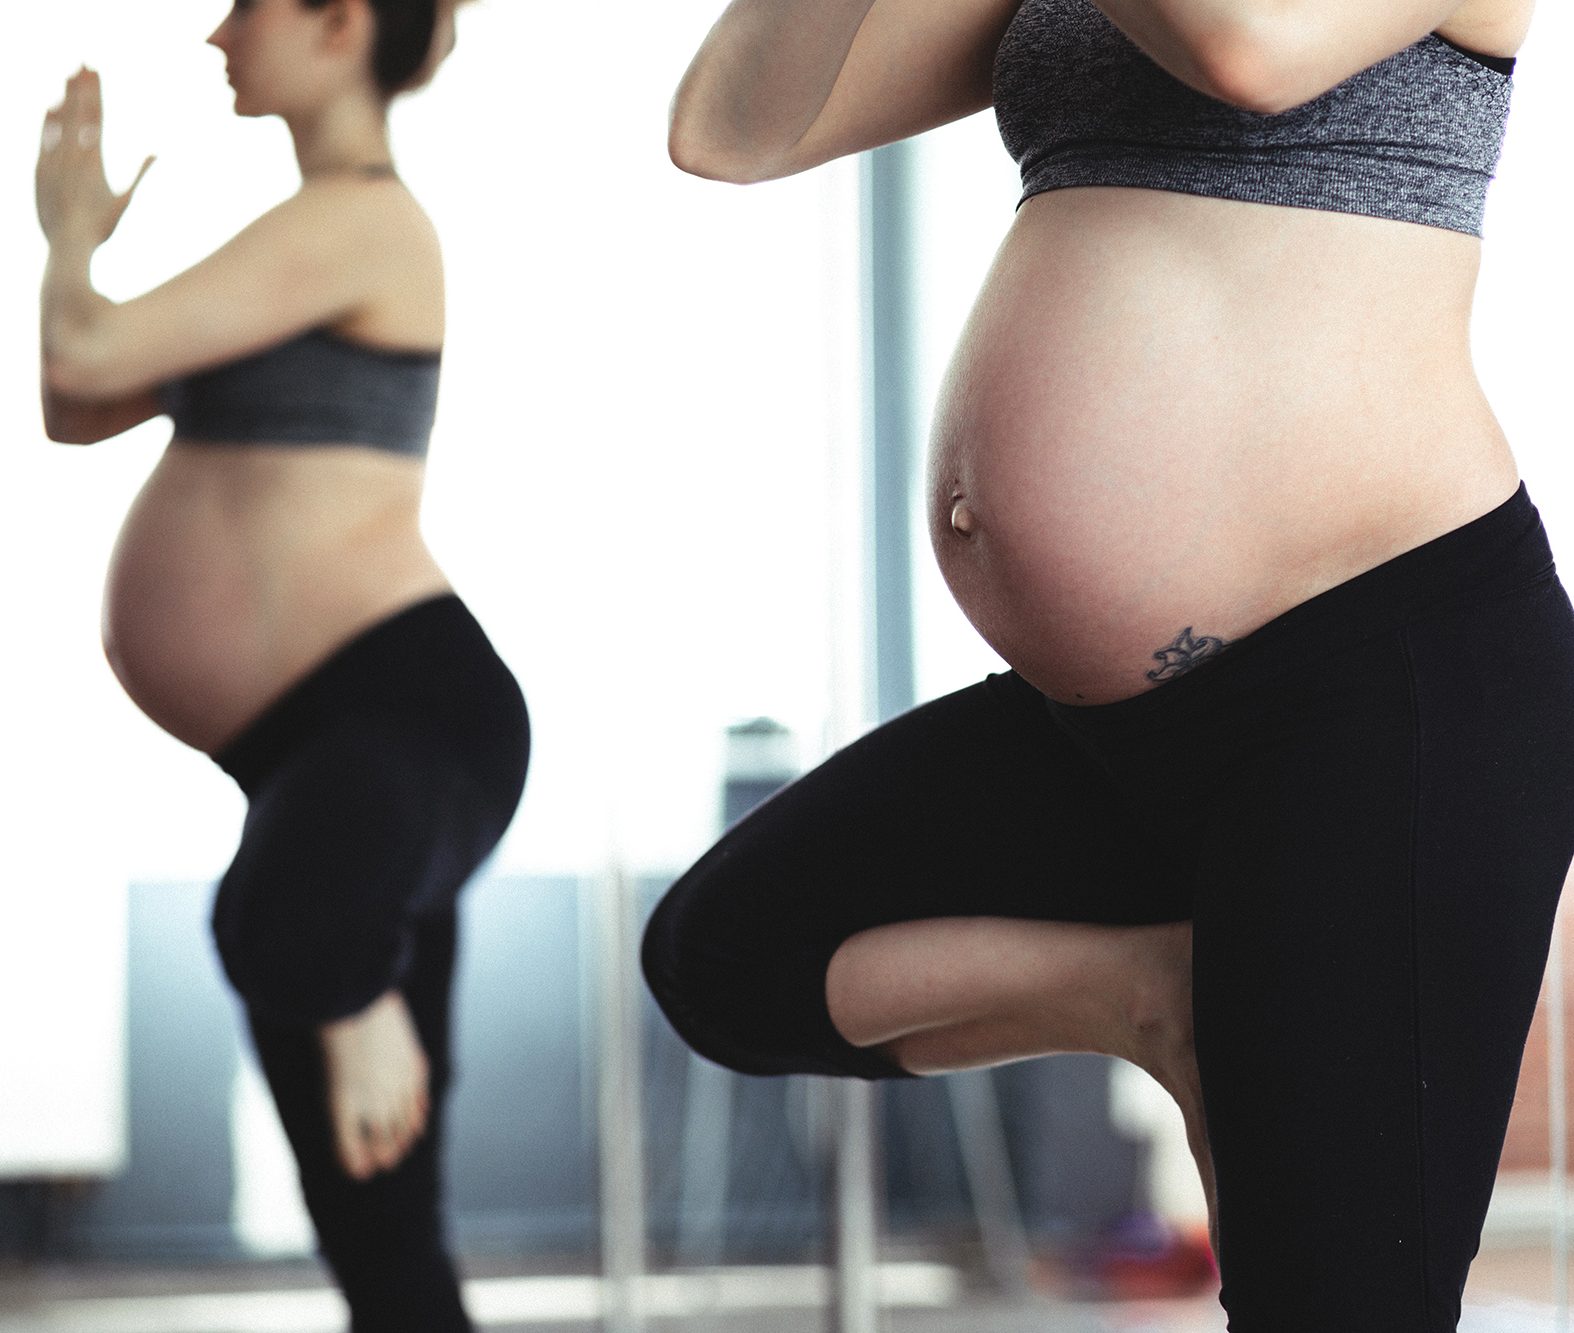 Performing Yoga while pregnant